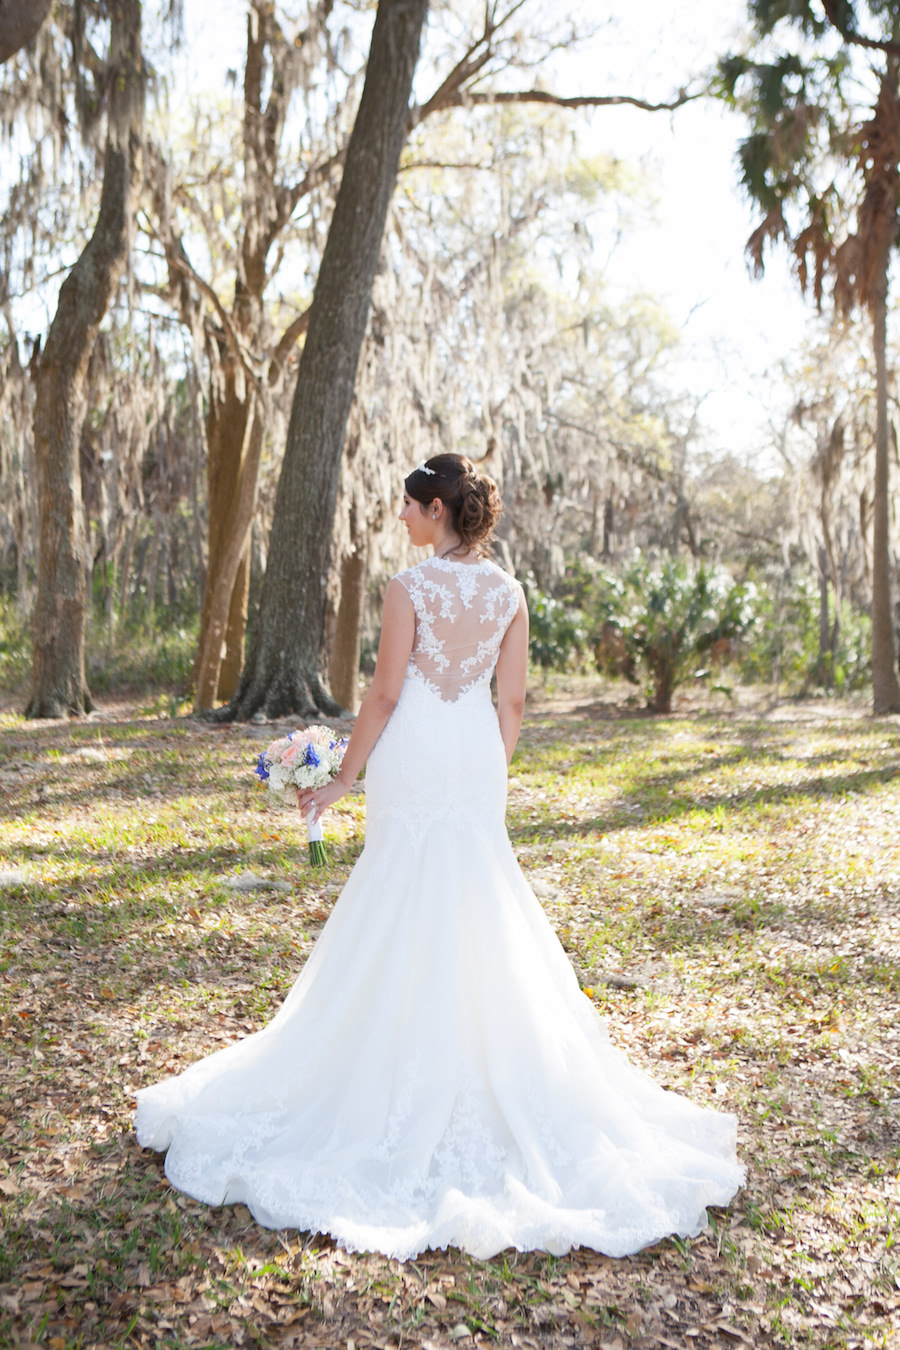 Outdoor, Bridal Wedding Portrait in Ivory, Lace Pronovias Wedding Dress with See Through Back | Safety Harbor Wedding Photographer Carrie Wildes Photography